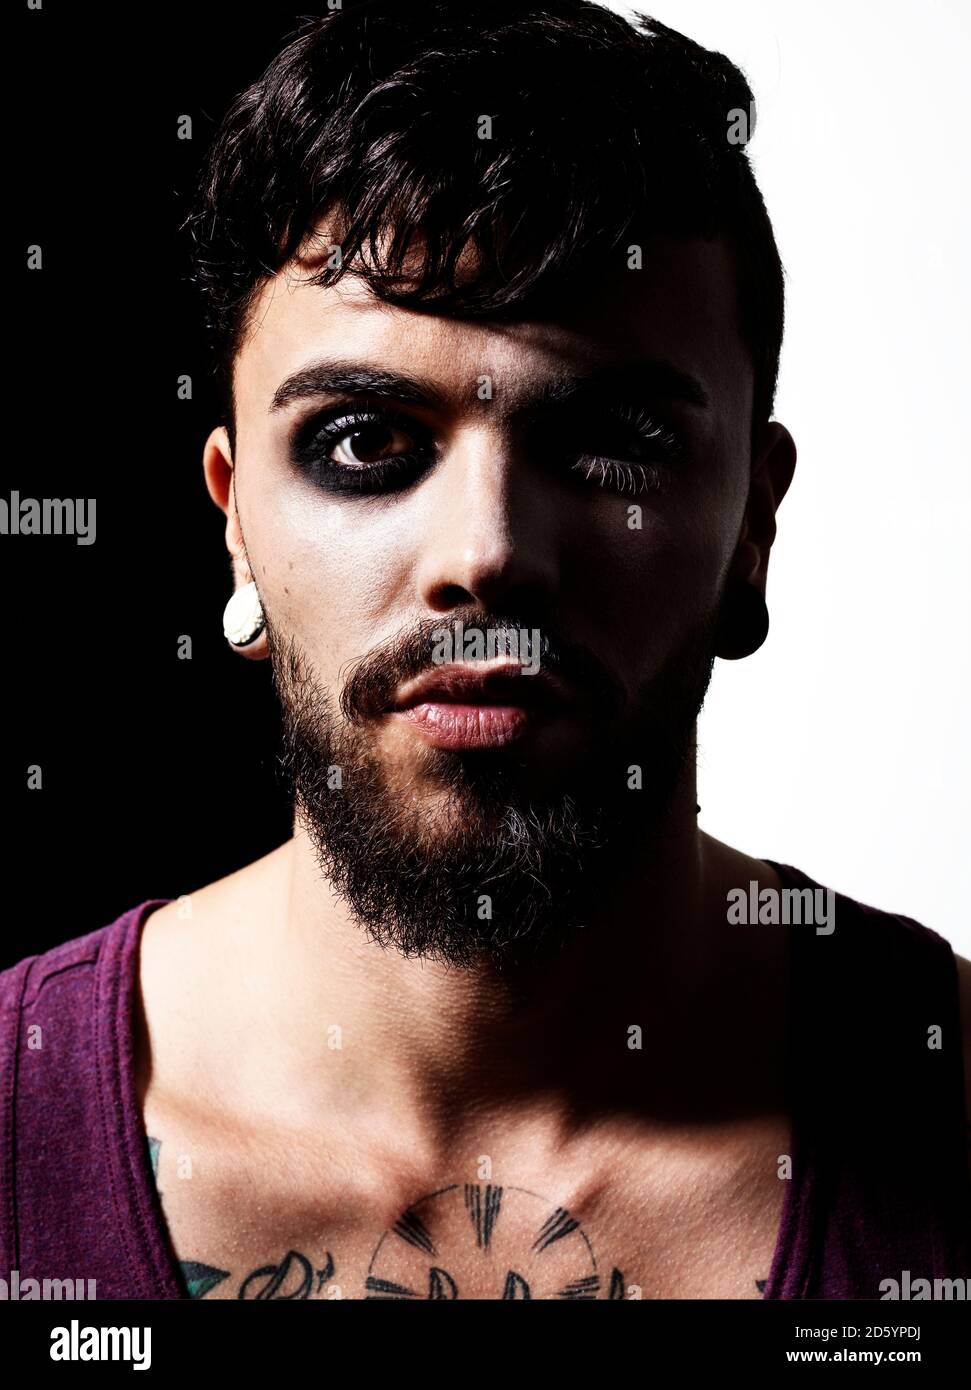 Portrait of man with full beard and earing wearing eye make up Stock Photo